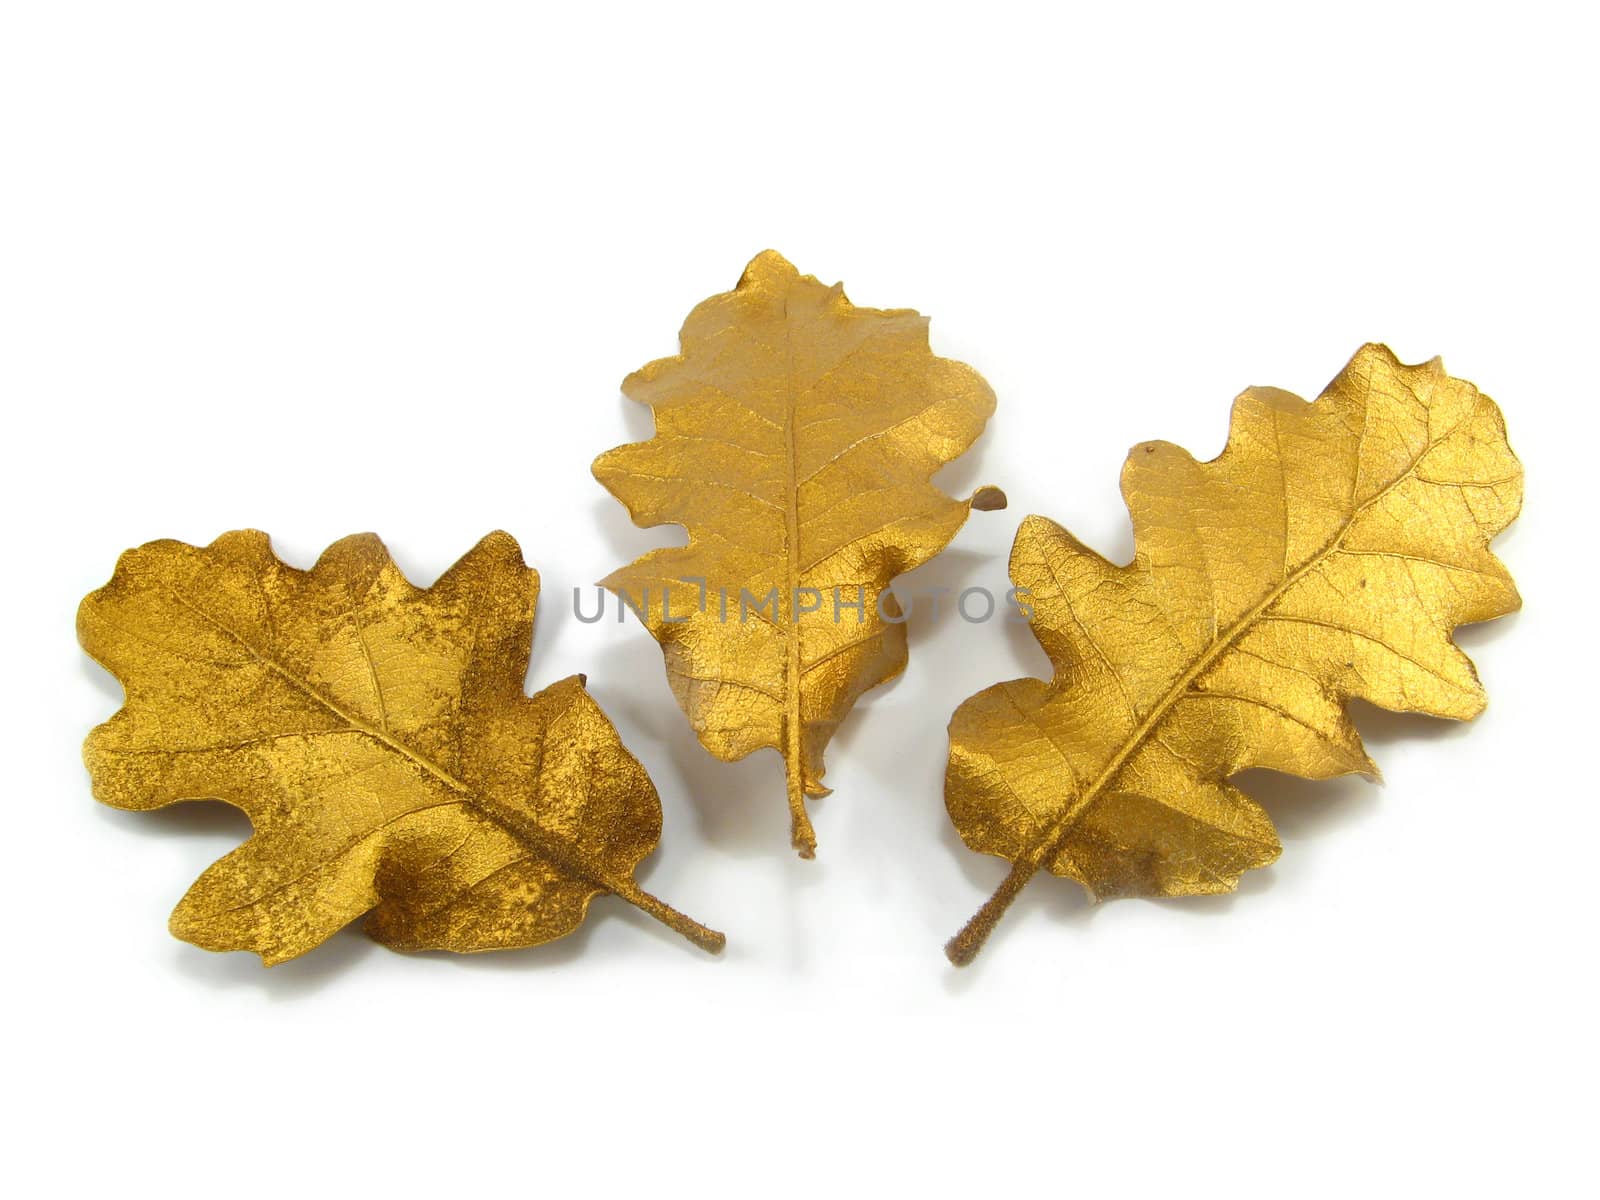 some golden leaves over a white background